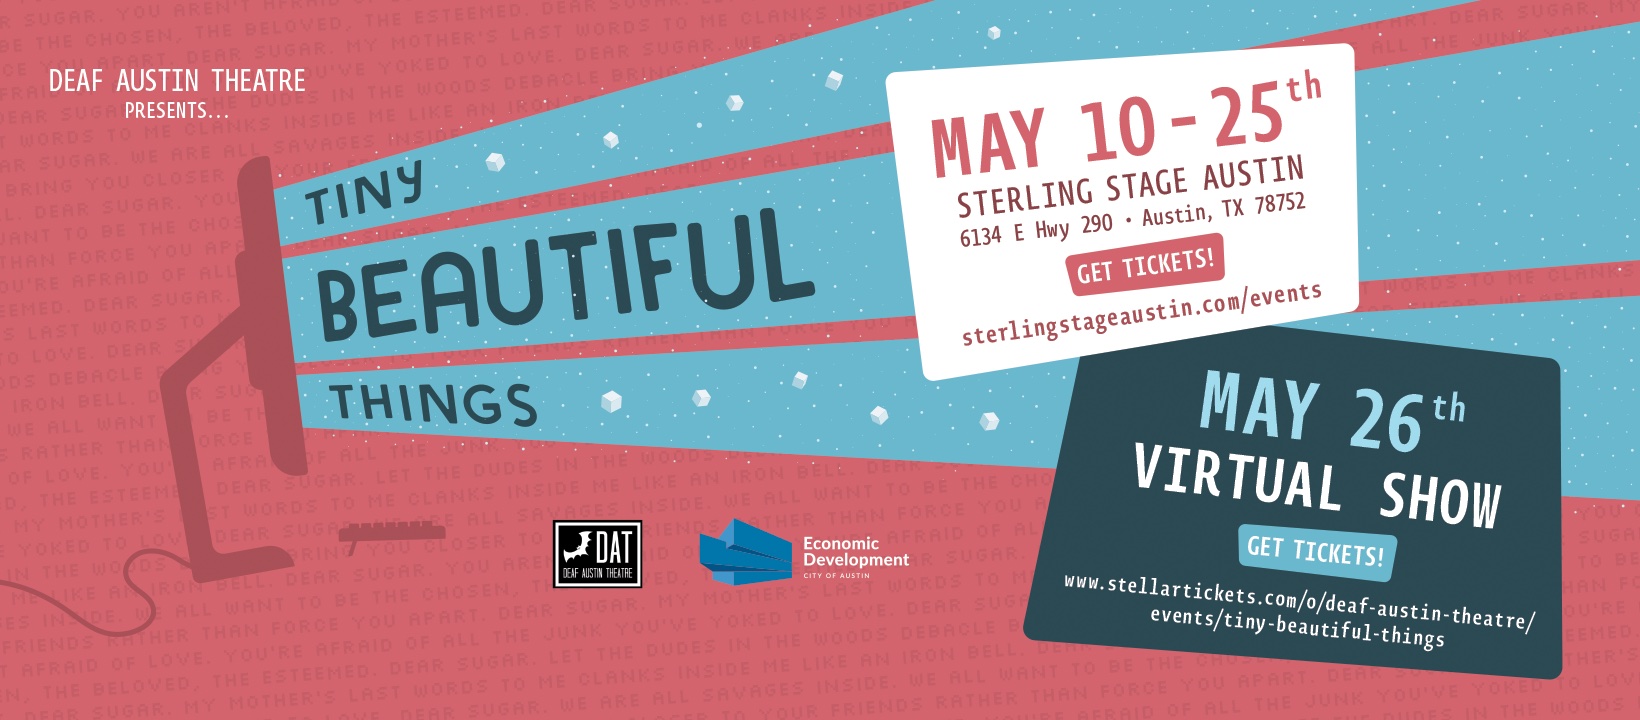 Tiny Beautiful Things by Deaf Austin Theatre